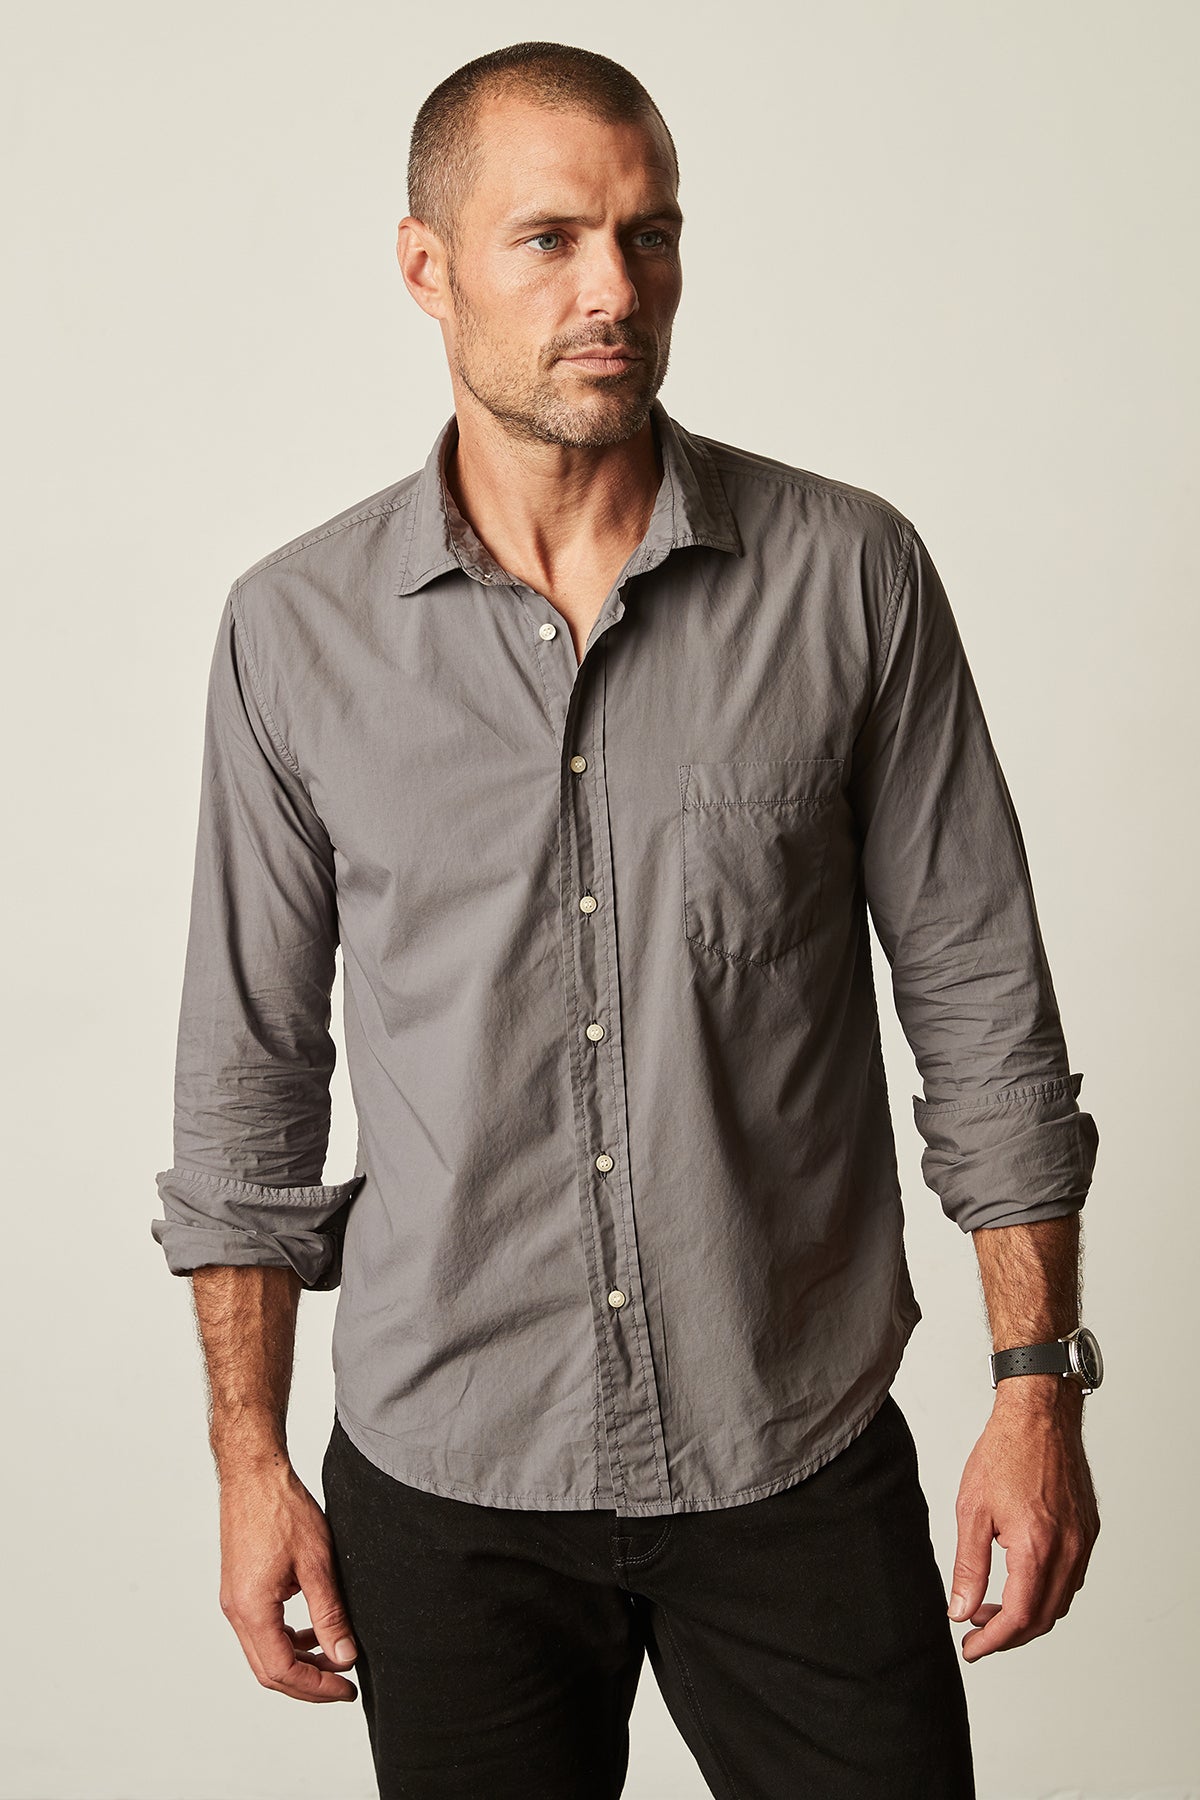   Brooks button up woven shirt in carbon front 